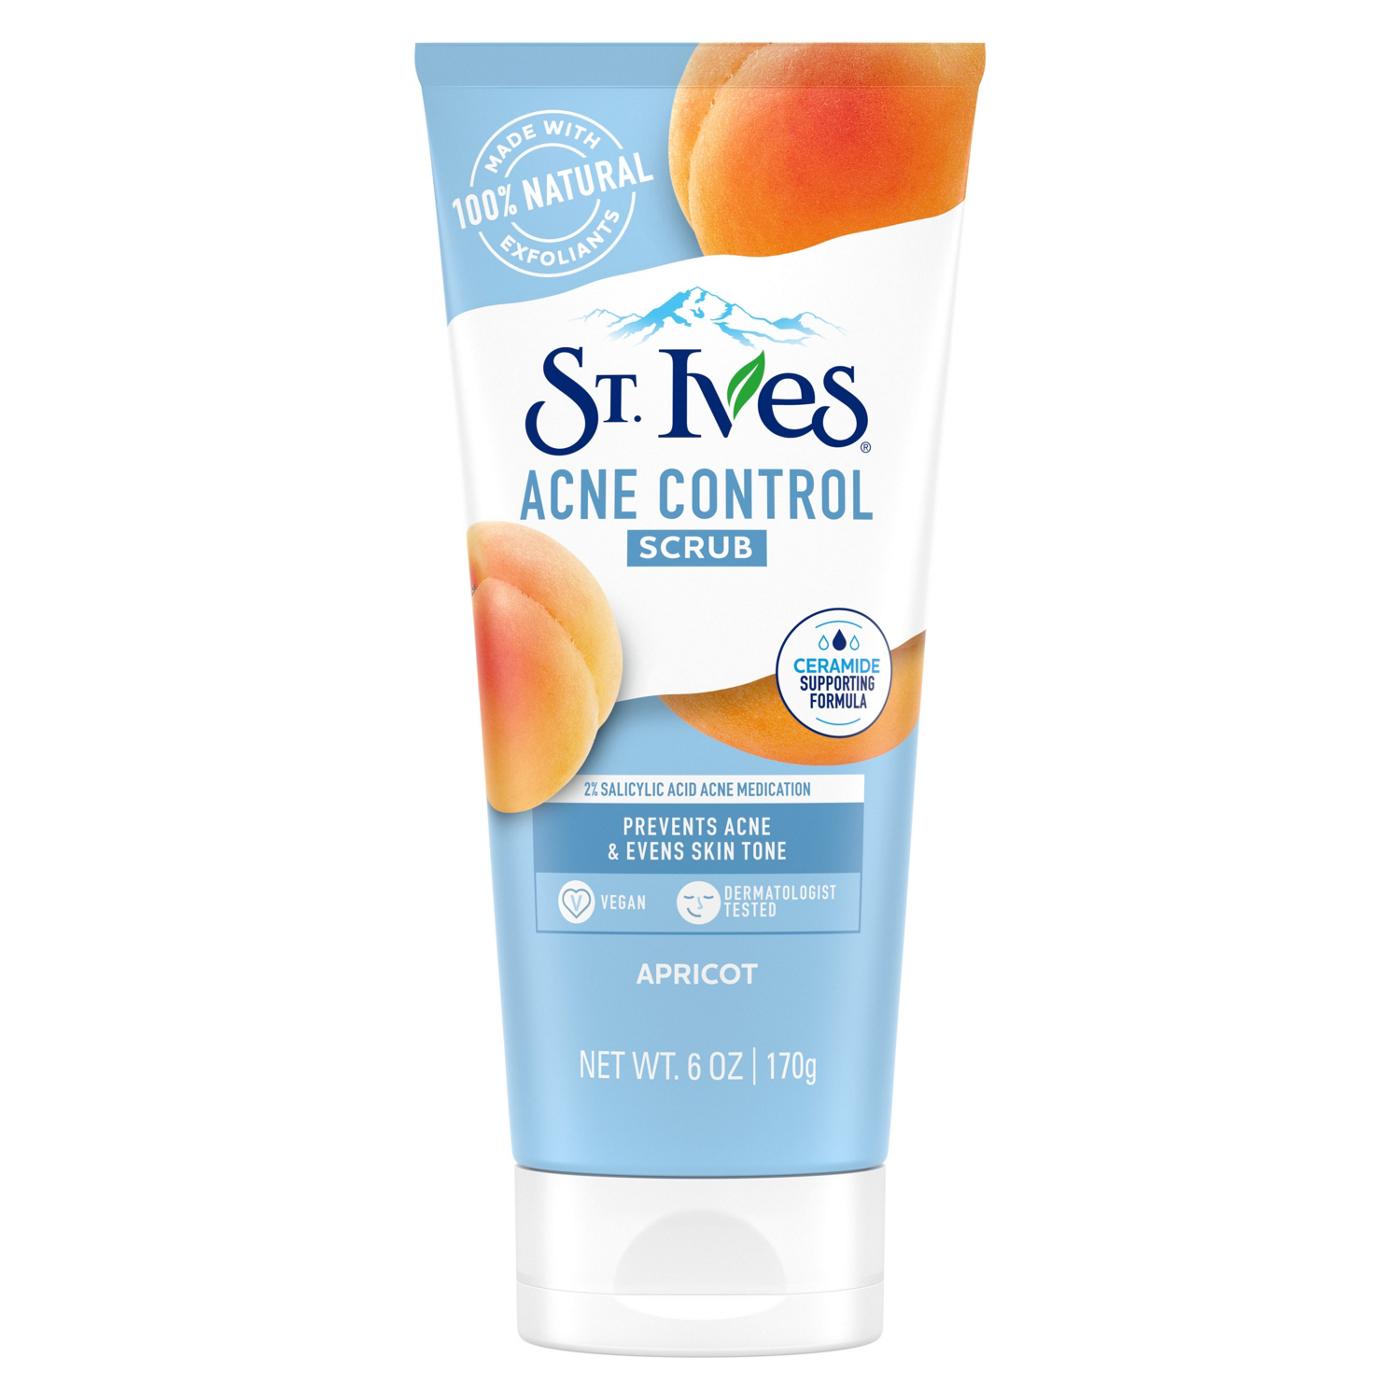 St. Ives Acne Control Face Scrub Apricot; image 1 of 3